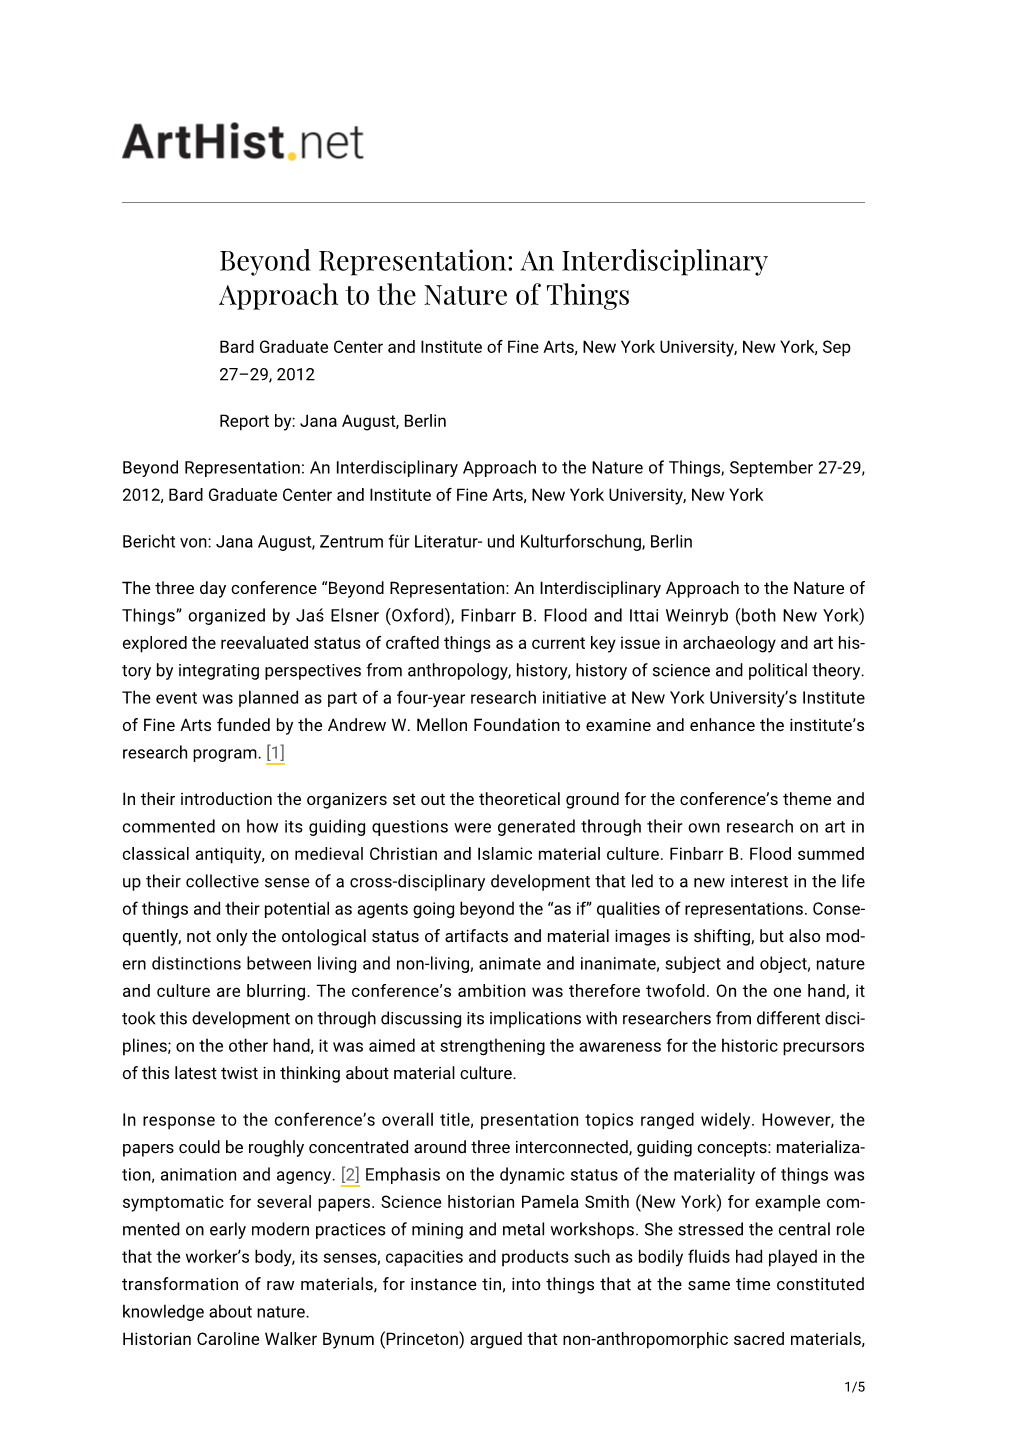 Beyond Representation: an Interdisciplinary Approach to the Nature of Things